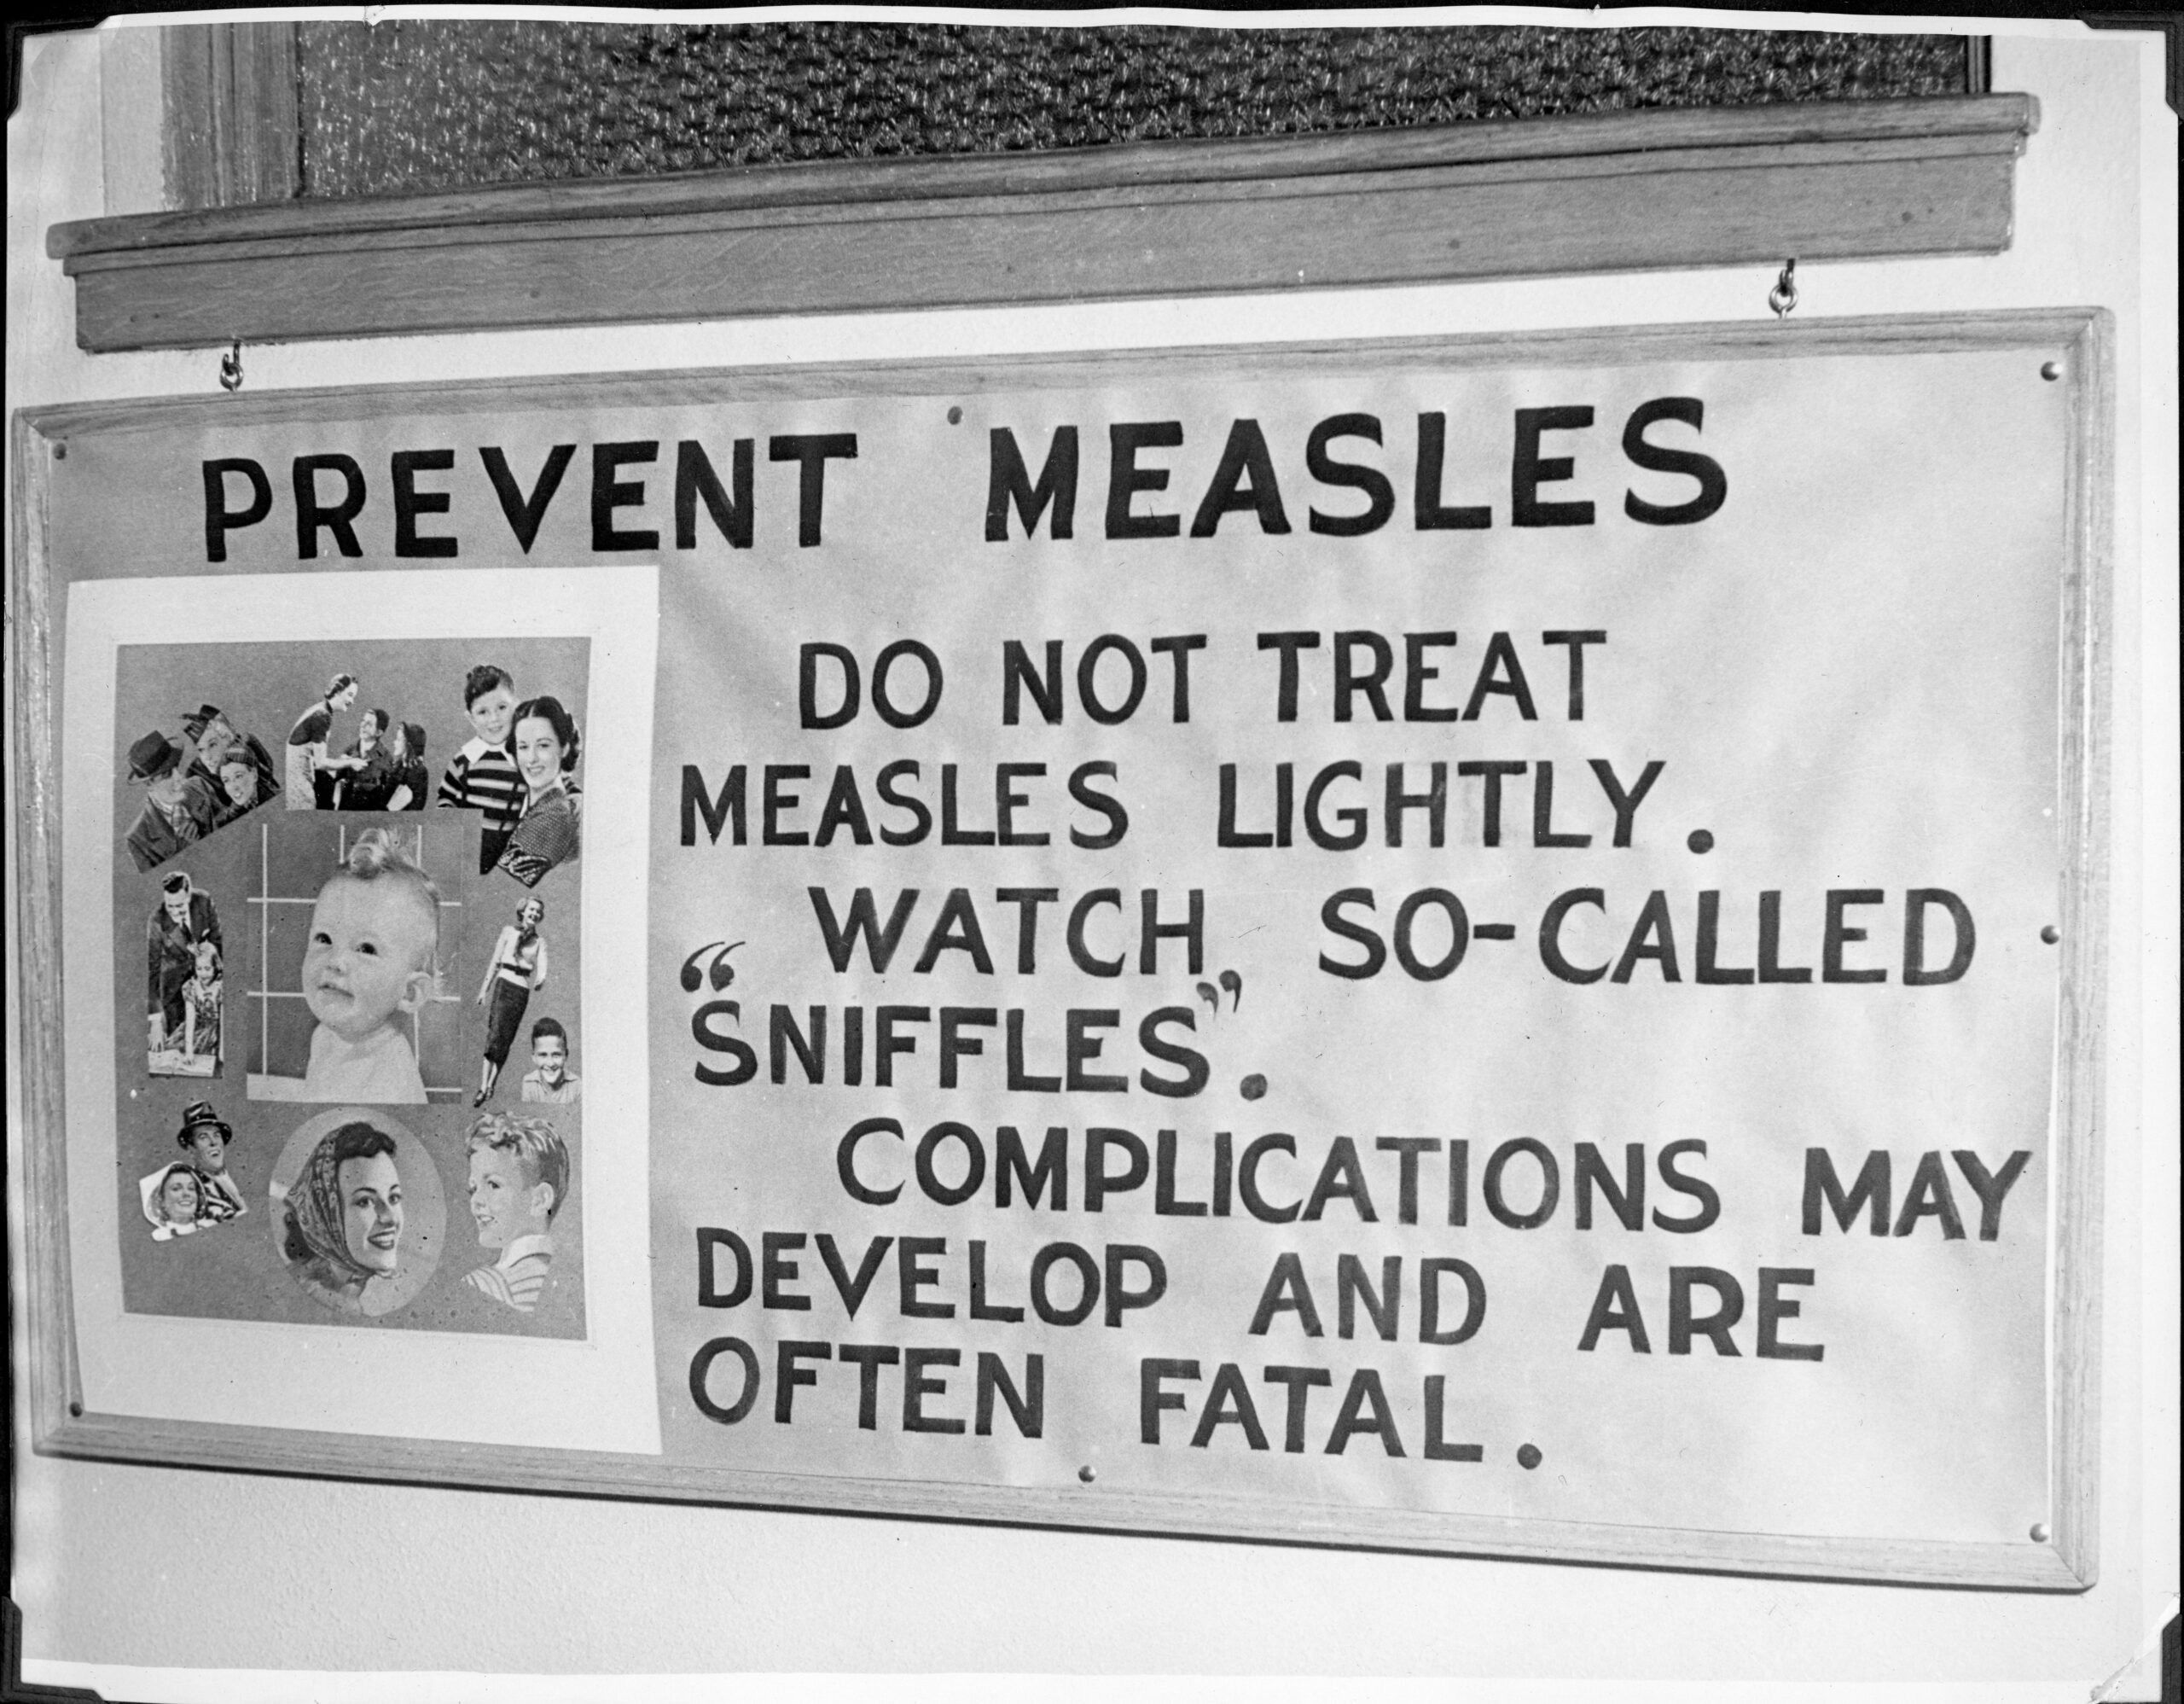 What Washington can learn from past measles outbreaks